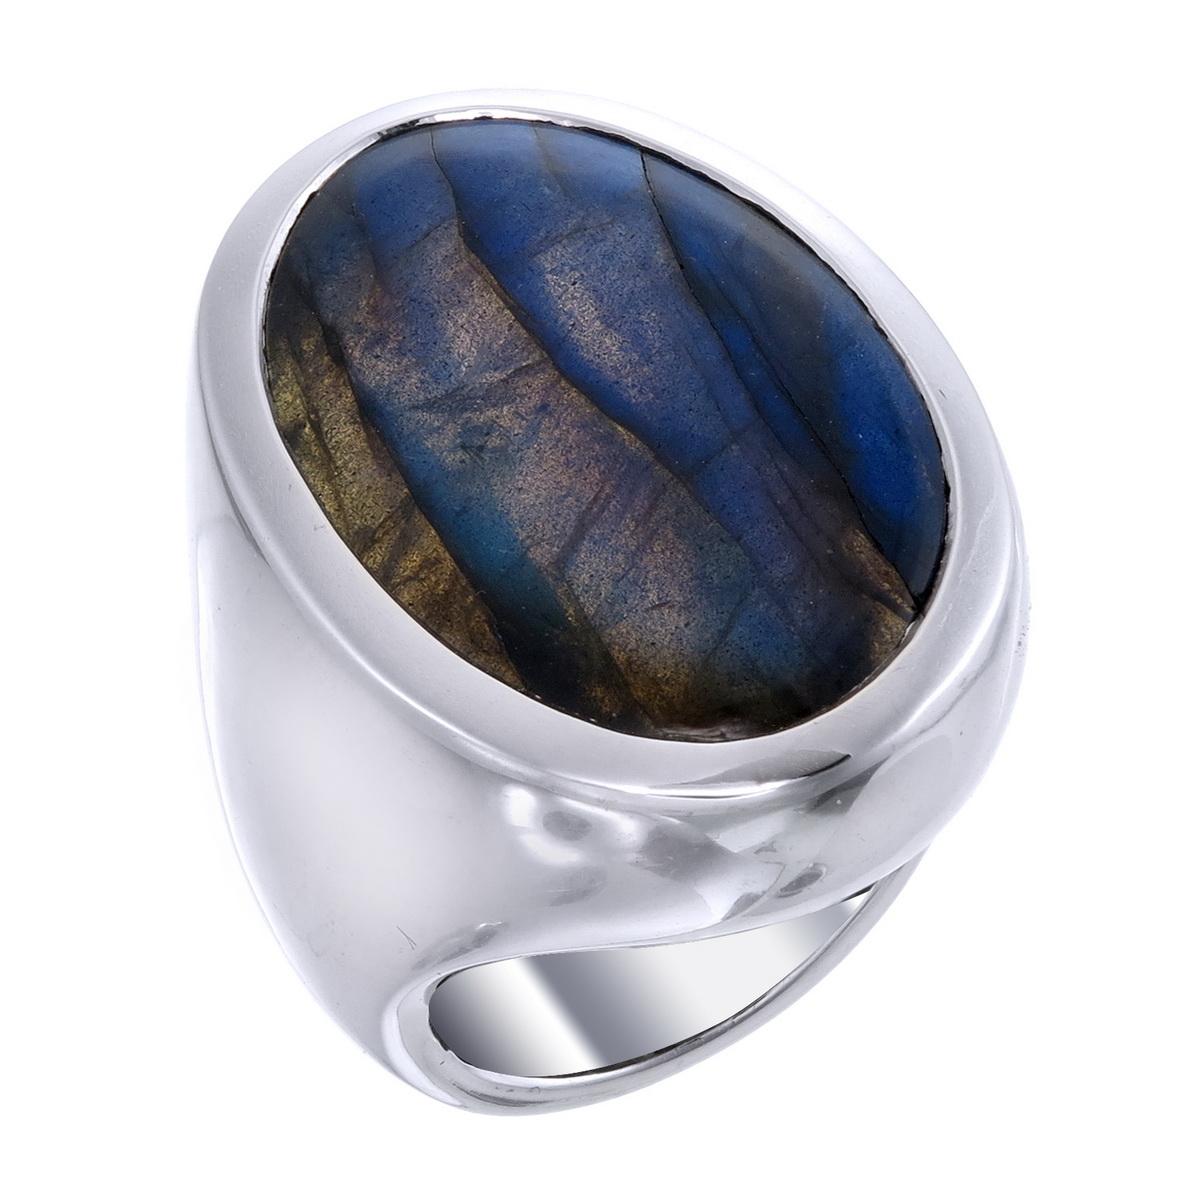 Orloff of Denmark; 34.67 carat Labradorite Sculpture ring fashioned out of 925 Sterling Silver.

A substantial piece of jewelry, this 35 carat labradorite sterling silver ring features a generously sized labradorite gemstone set within a sturdy